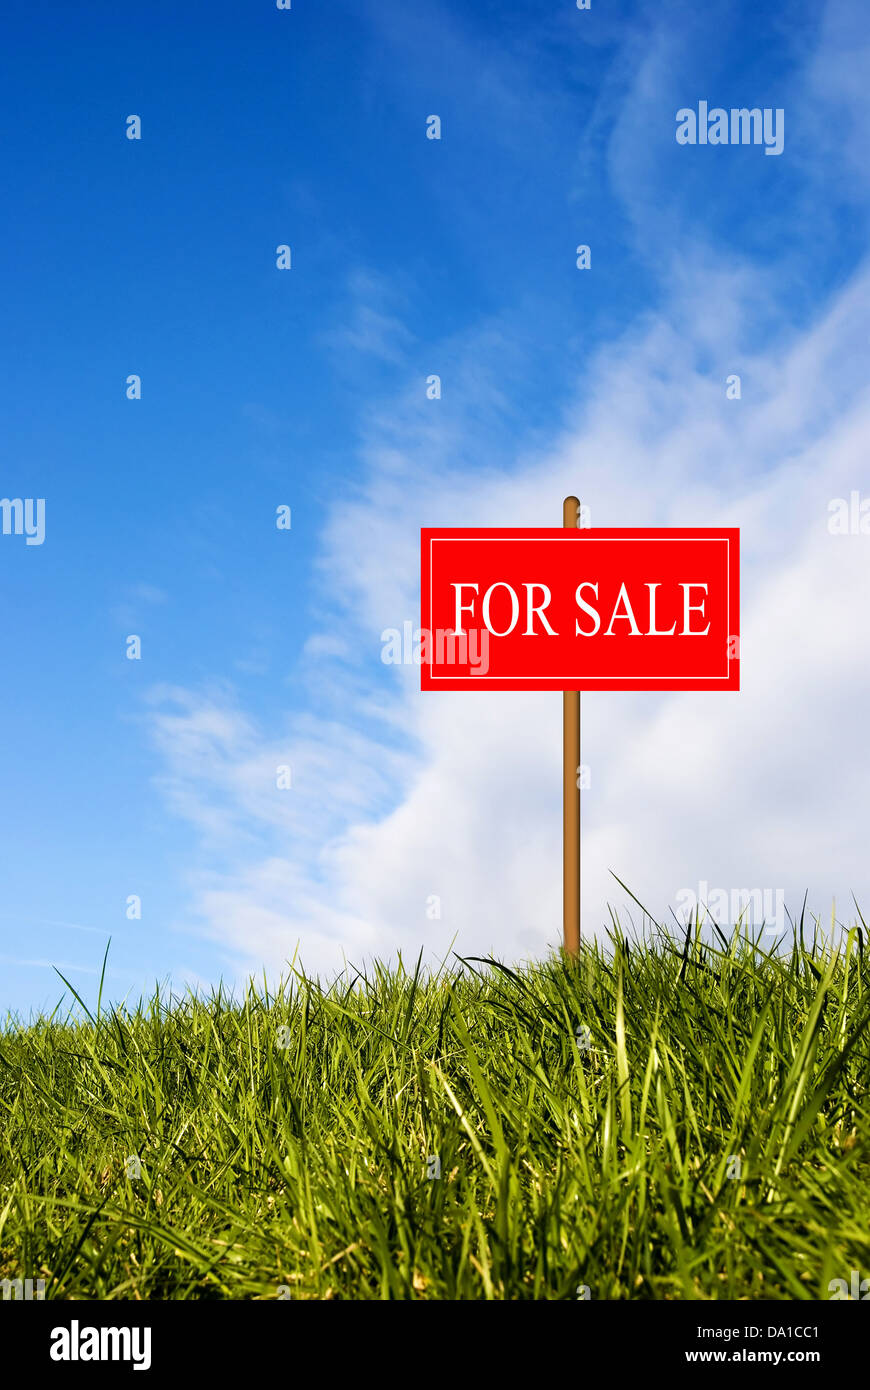 Land For Sale Sign On Grass Concept Stock Photo Alamy